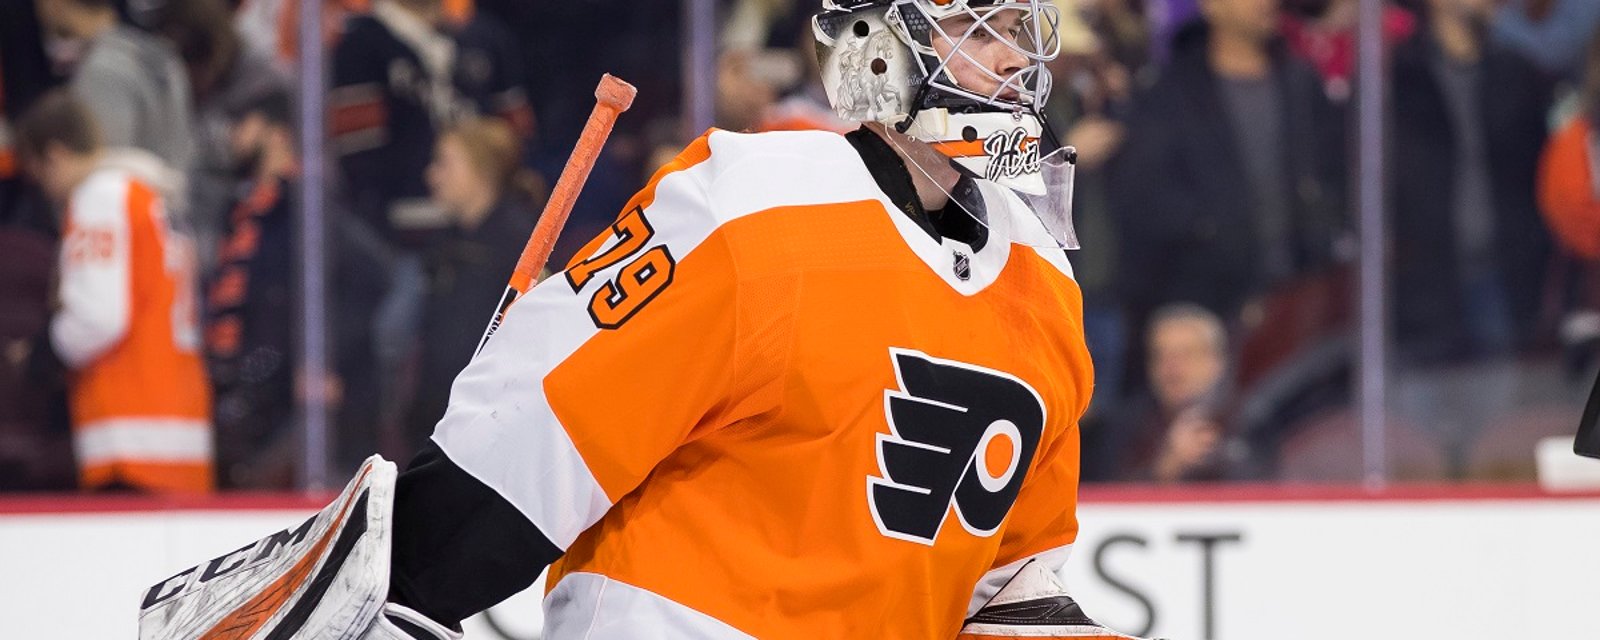 Carter Hart playing his final games as a Flyer.